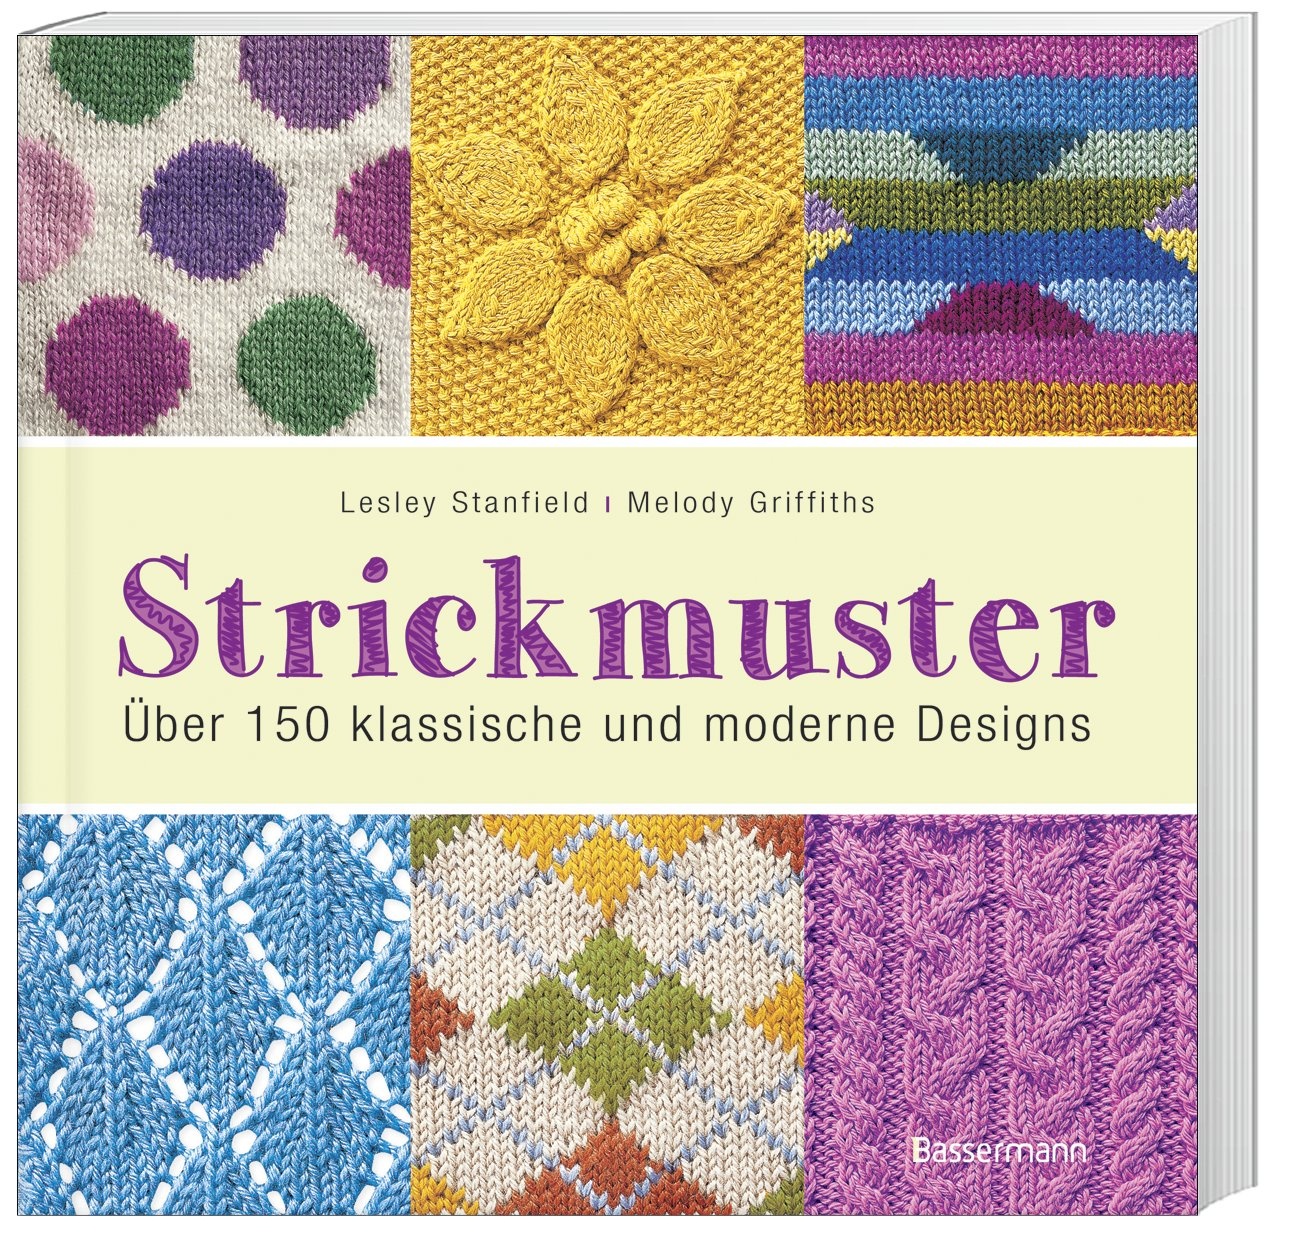 Strickmuster - Lesley Stanfield  Melody Griffiths  Kartoniert (TB)